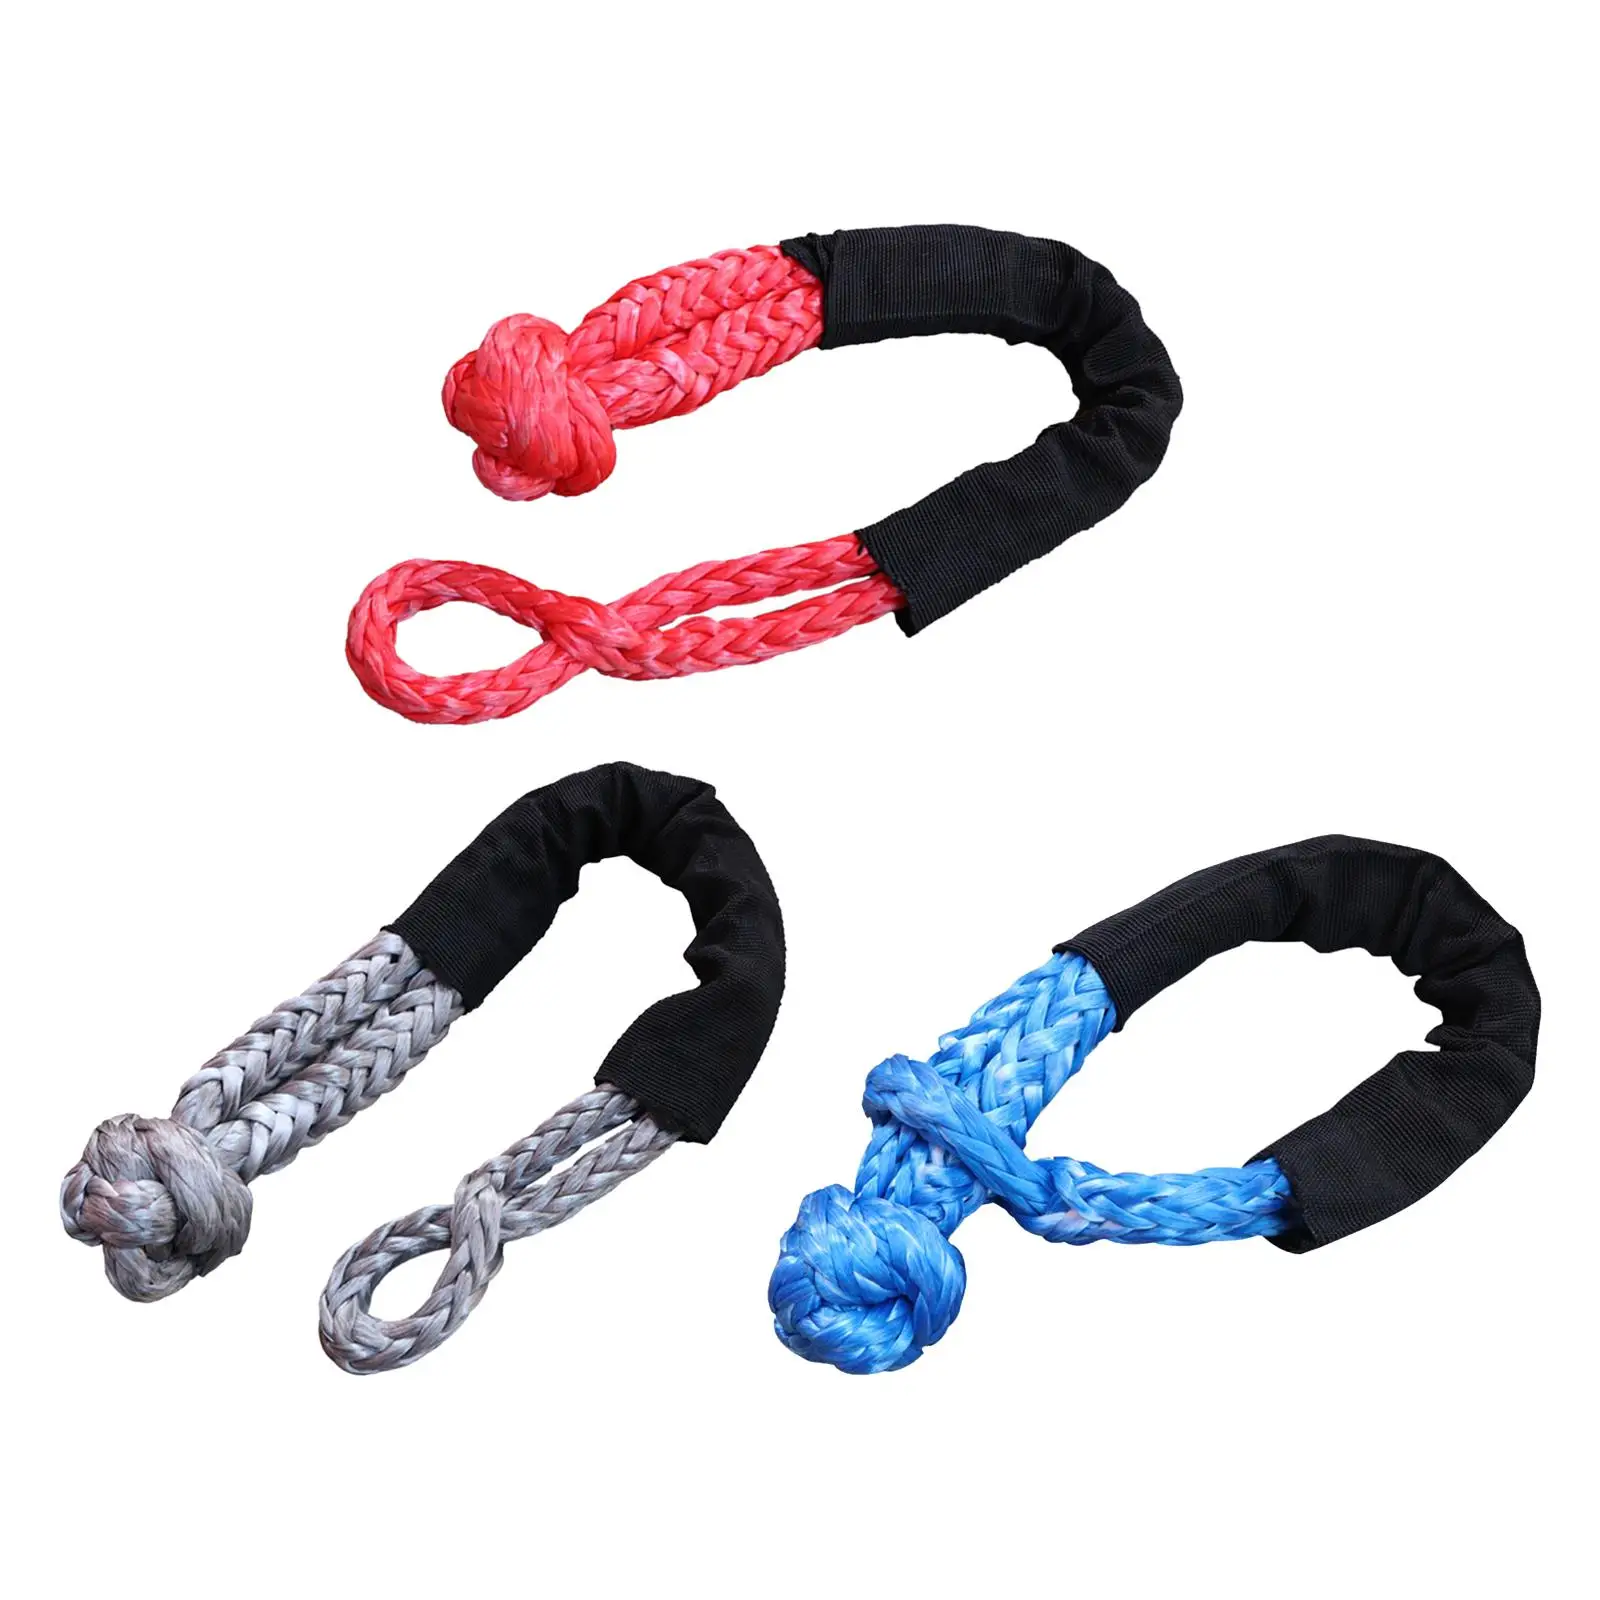 Soft Shackle Towing Rope, Strong Synthetic Rope Strong Breaking Strength for Trucks, SUV, Vehicles Towing